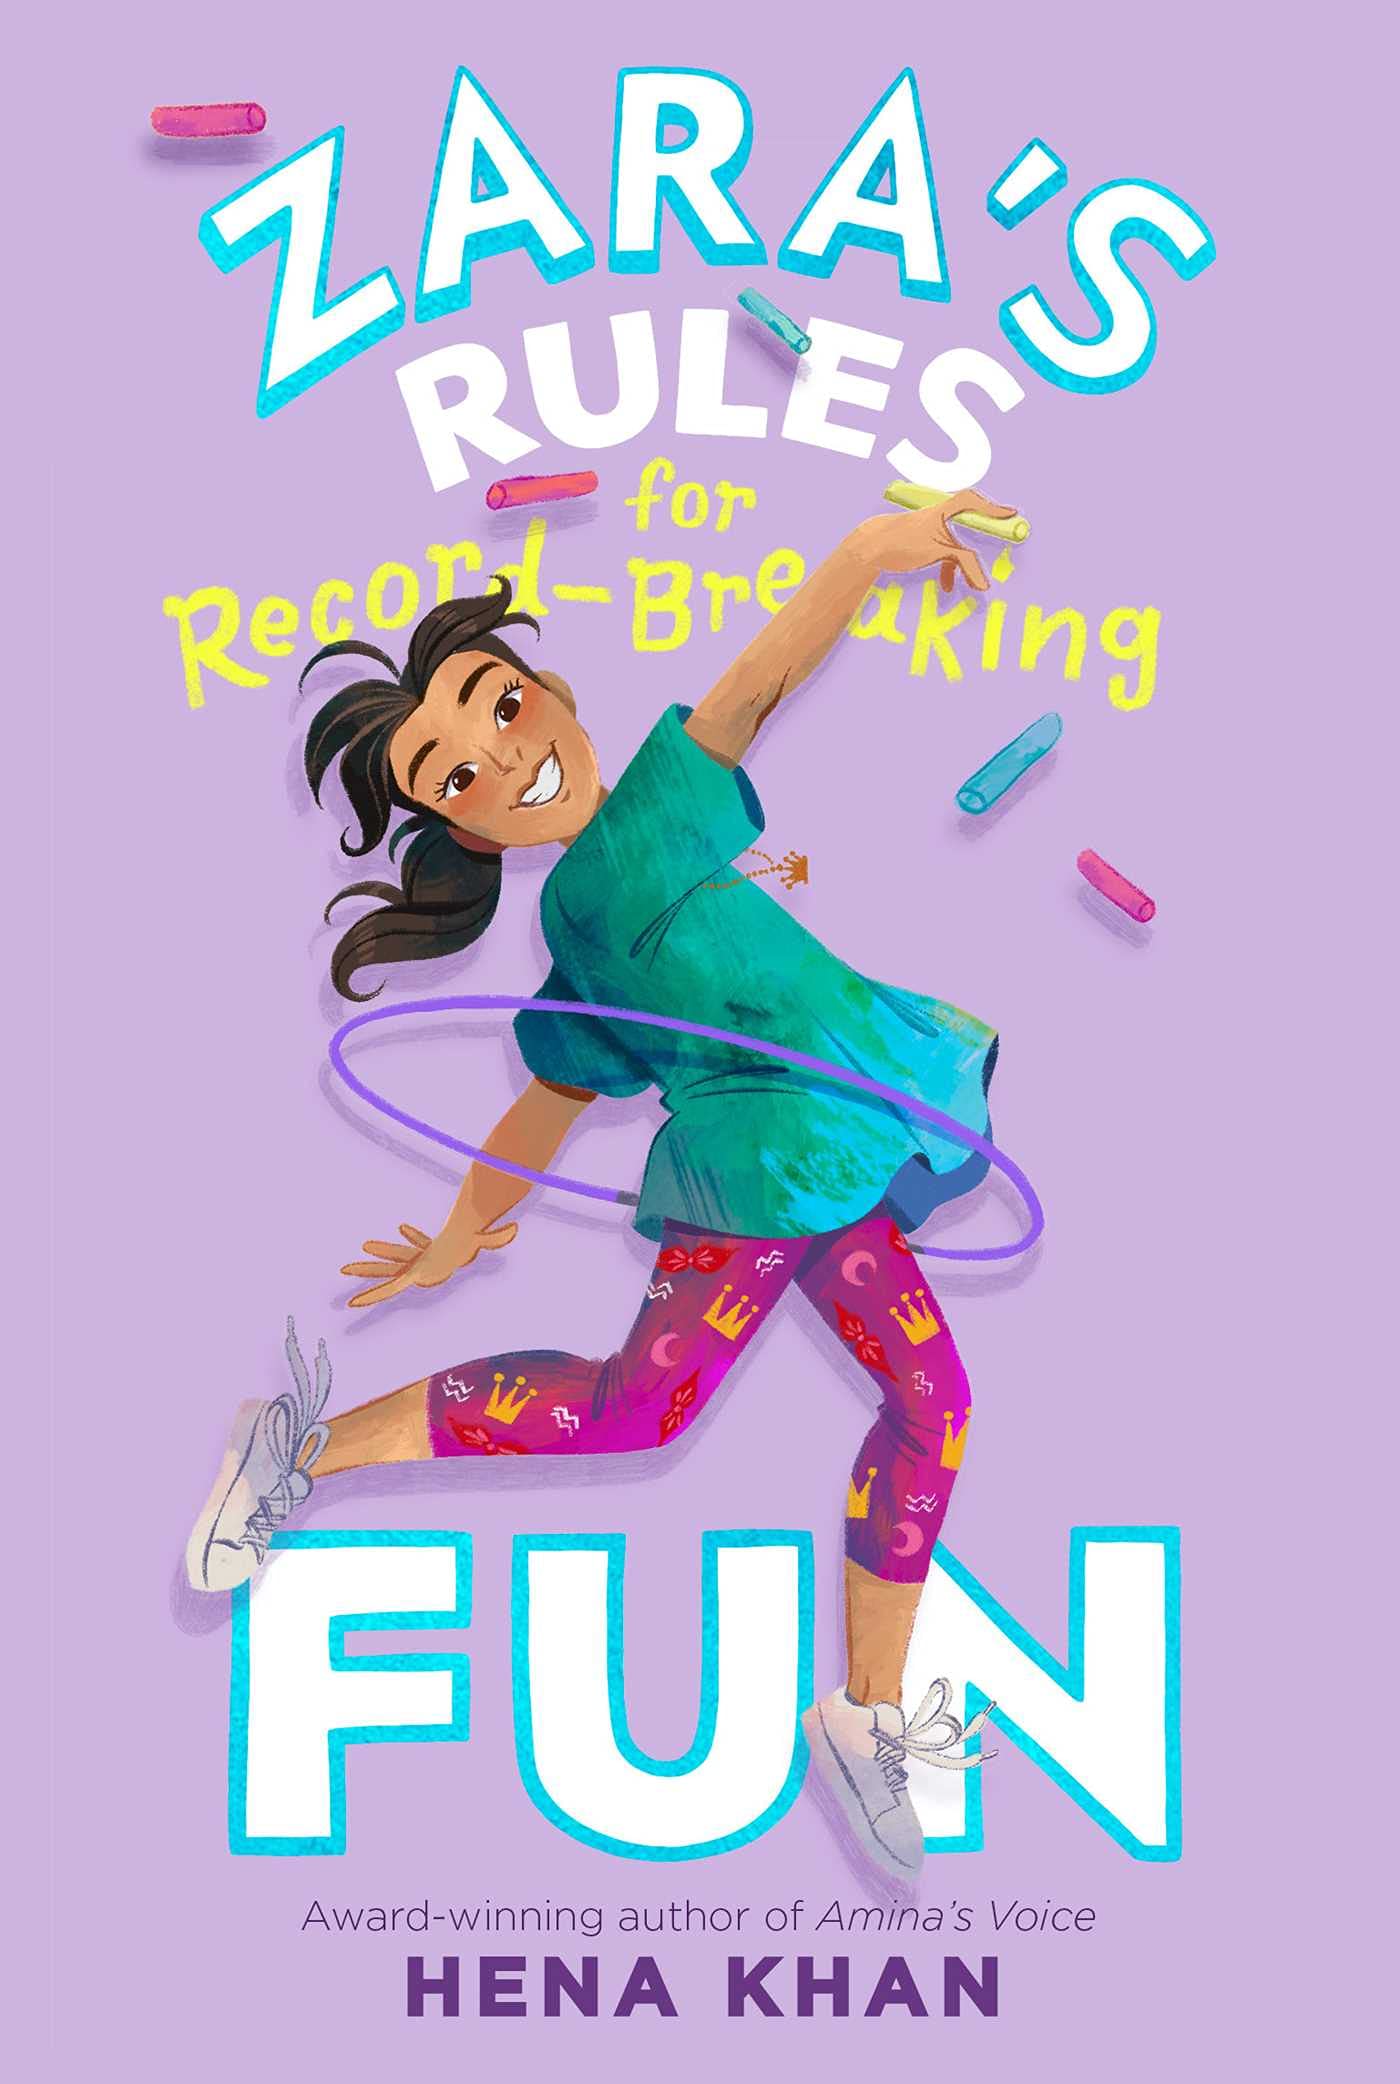 Image for "Zara&#039;s Rules for Record-Breaking Fun"